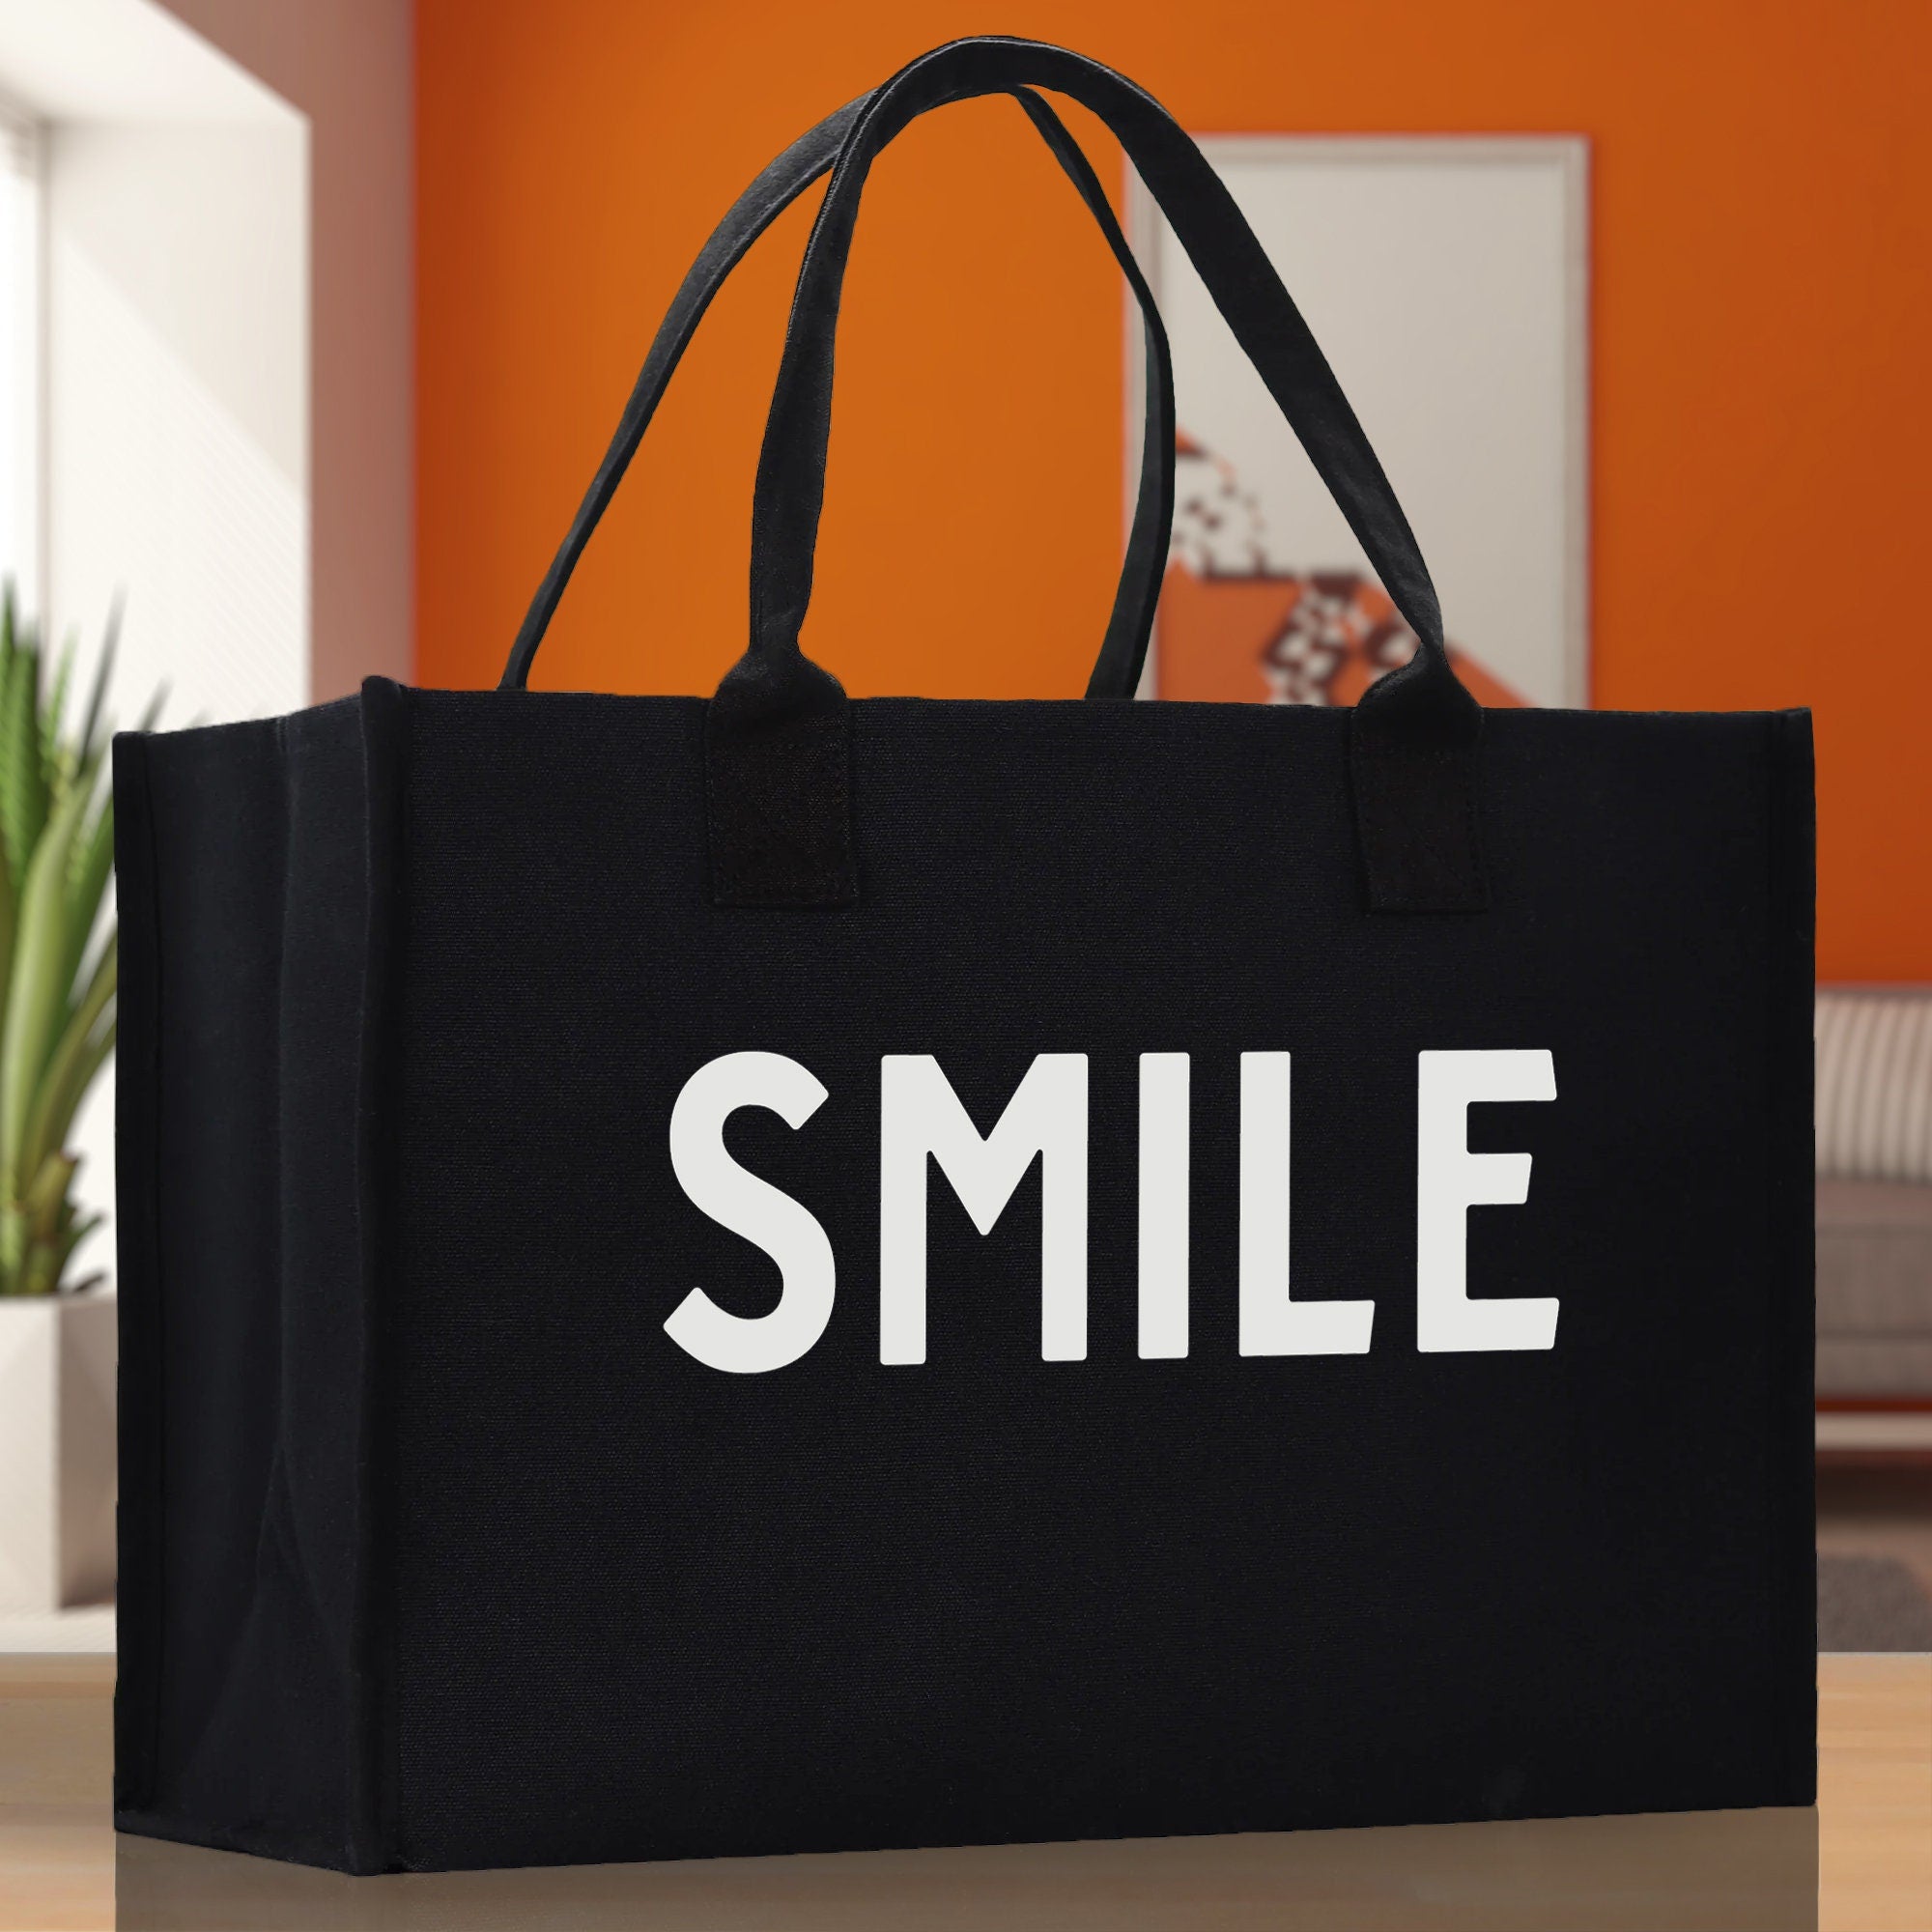 Smile Cotton Canvas Chic Beach Tote Bag Multipurpose Tote Weekender Tote Gift for Her Outdoor Tote Vacation Tote Large Beach Bag